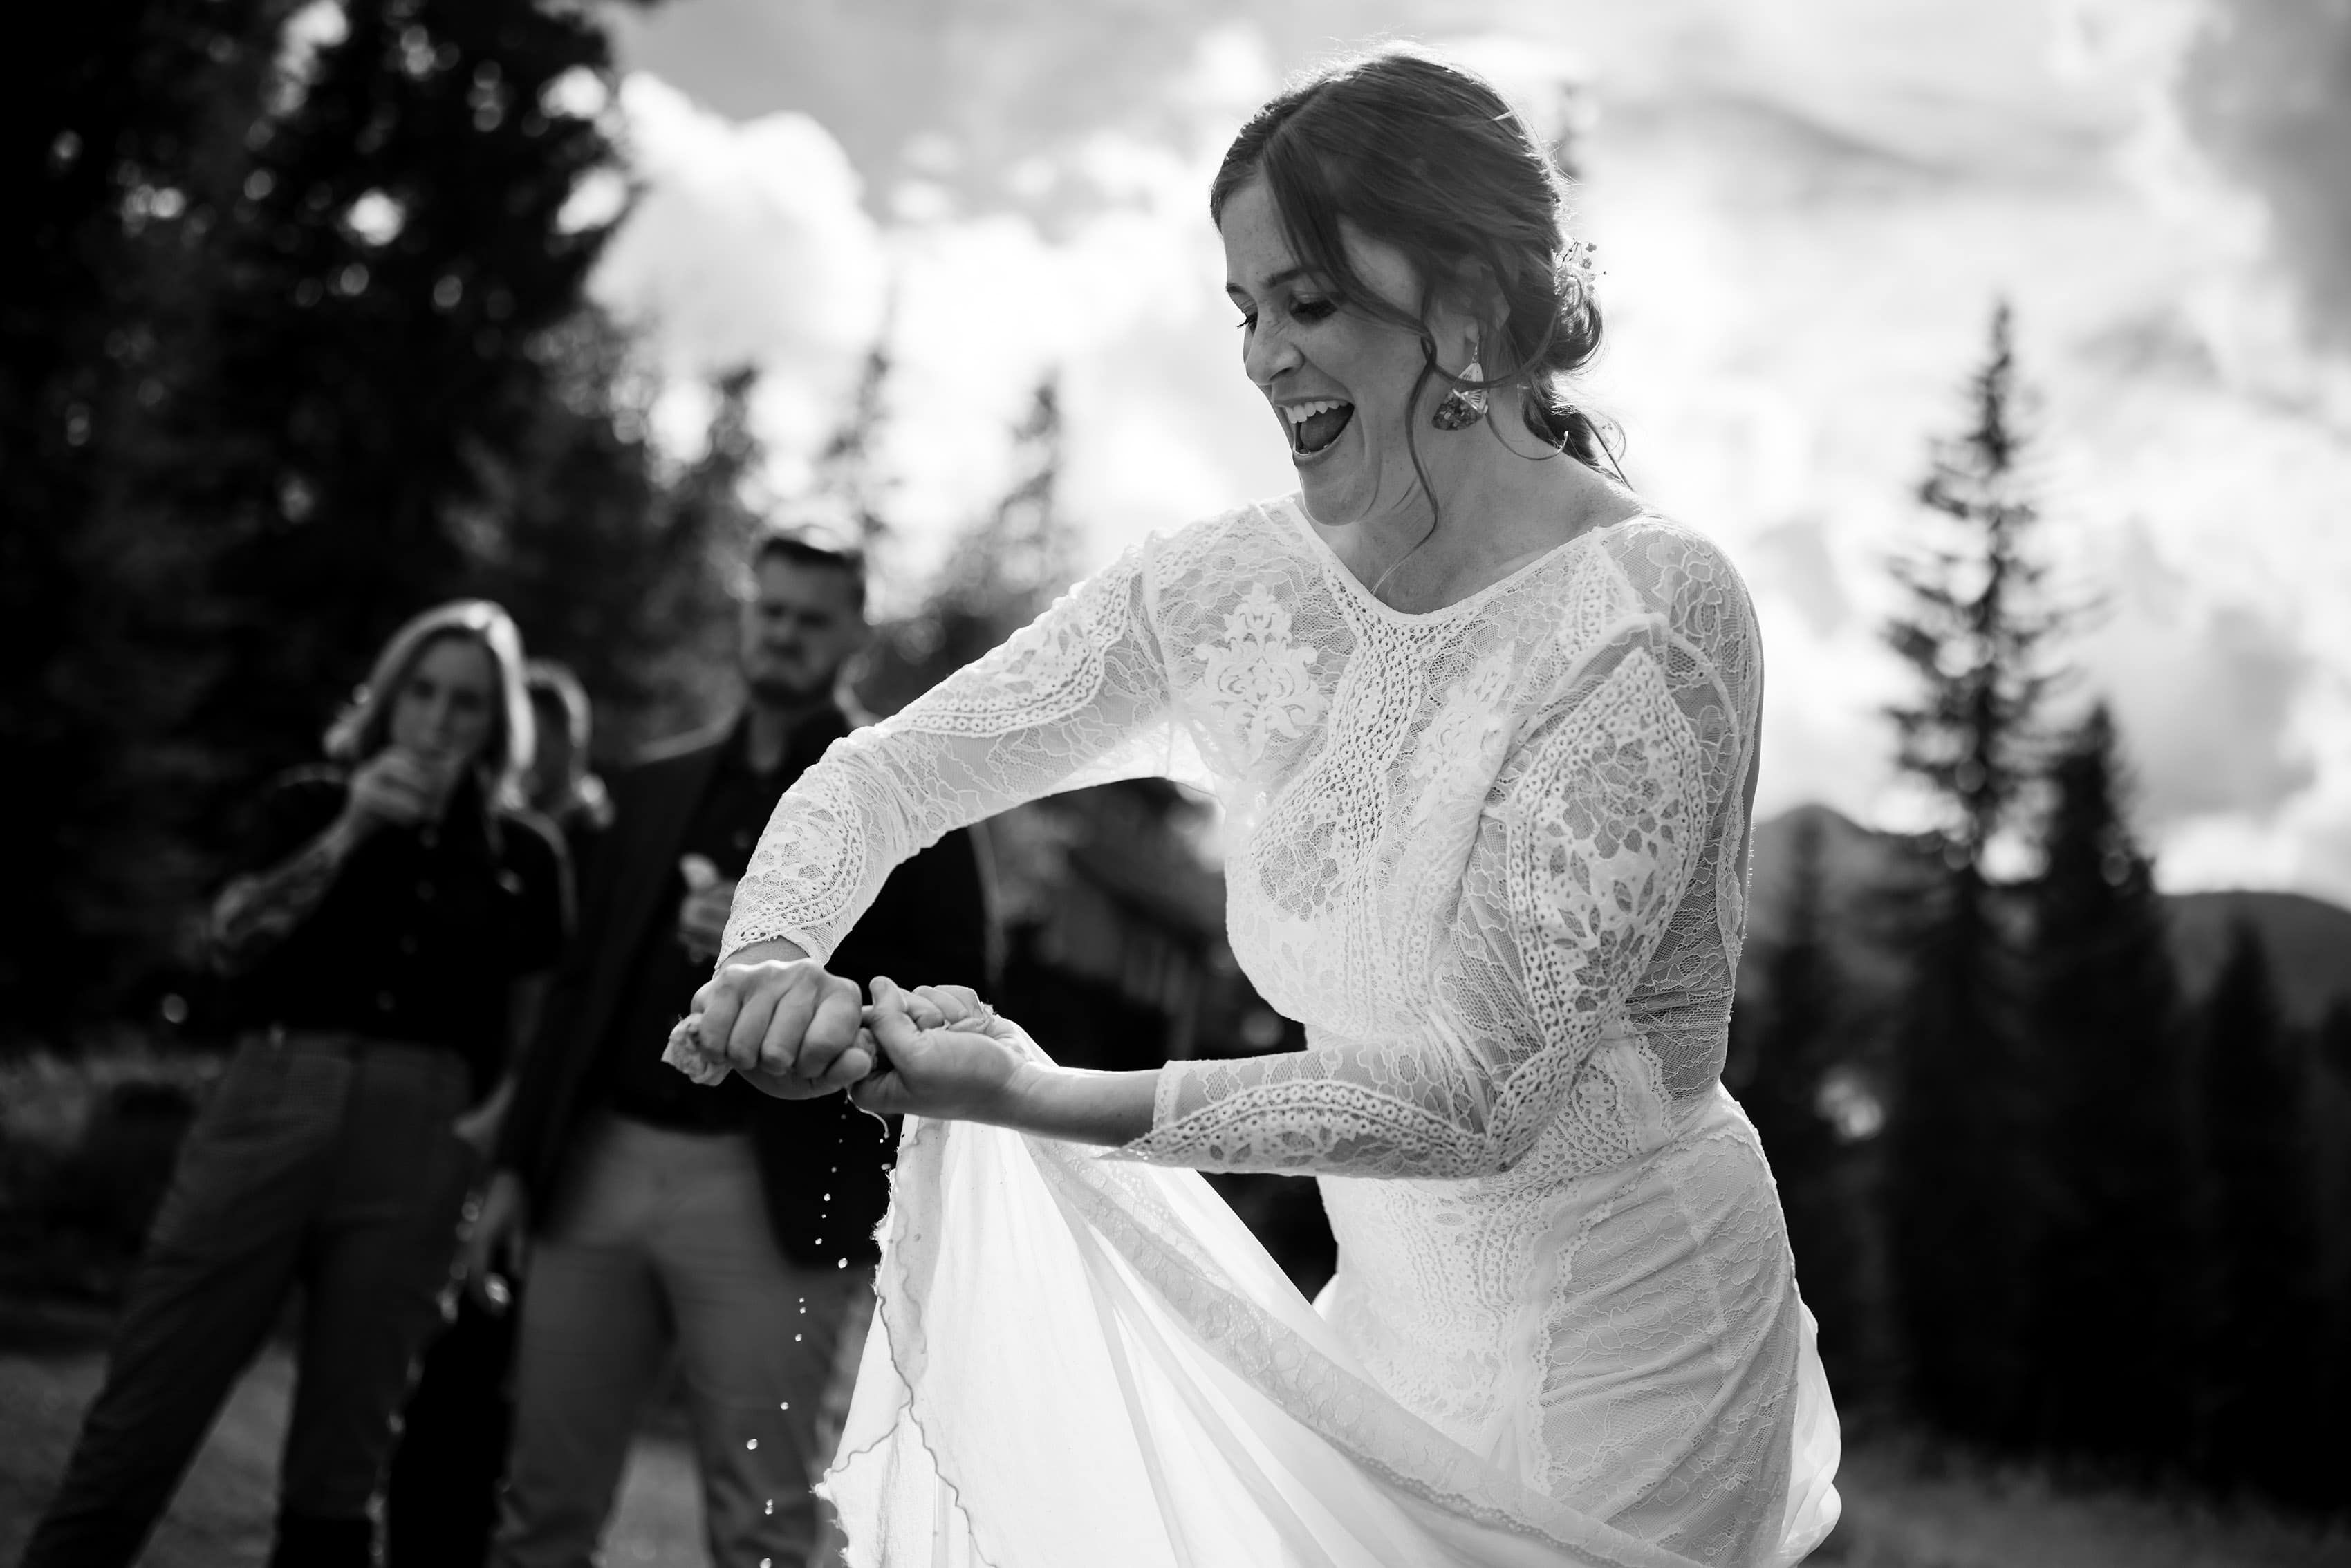 Cait wrings water out of her wedding dress